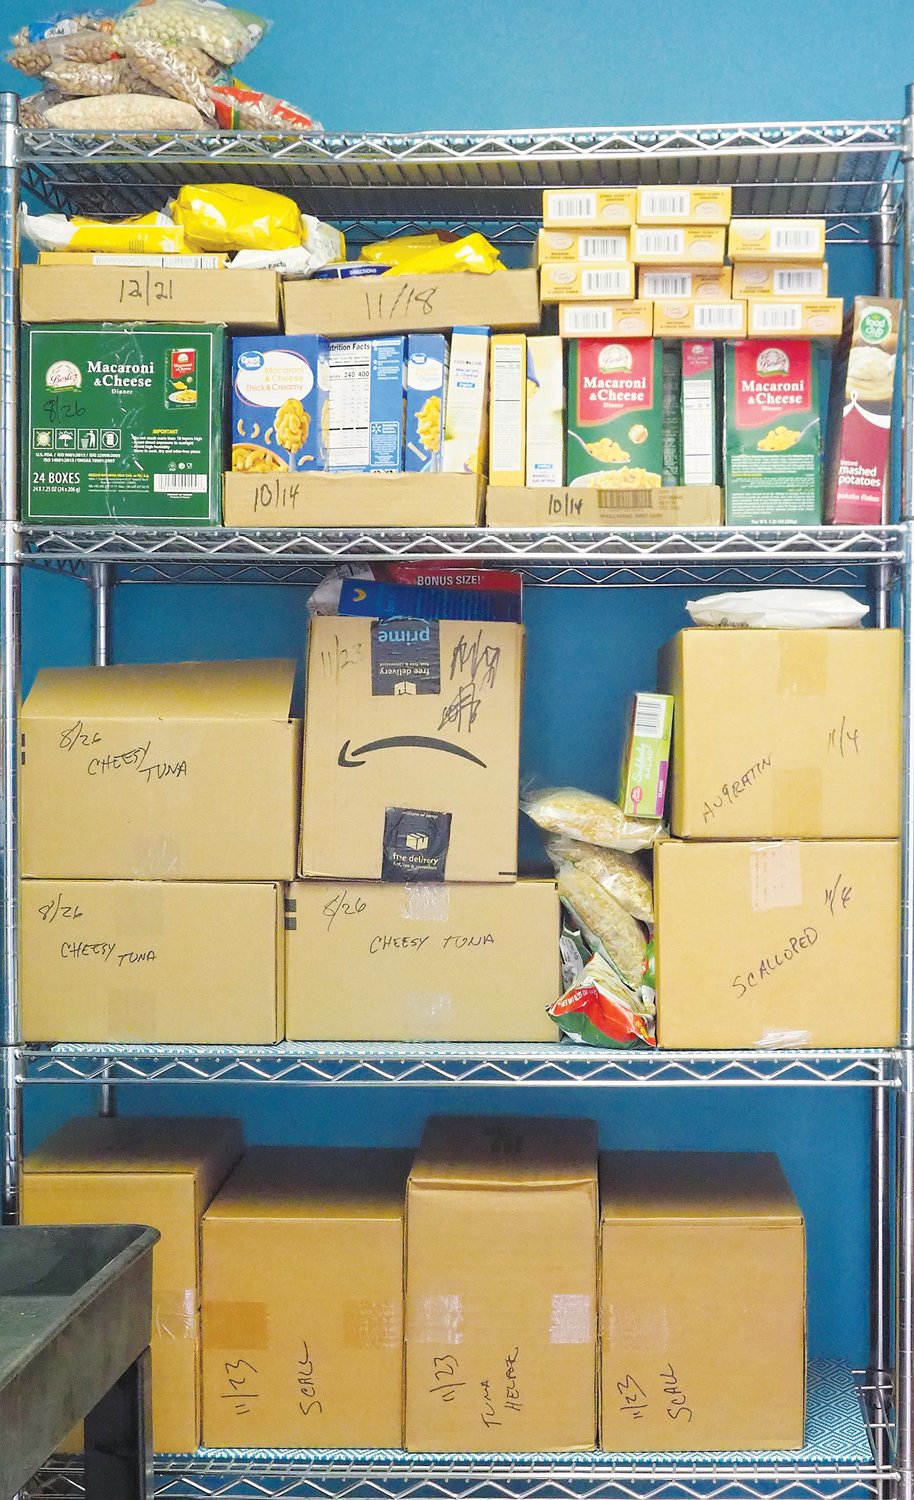 Love Chatham maintains a food pantry inside Freedom Family Church in Siler City to distribute free food to those in need every first and third Saturday of the month. Basic pantry items include rice, beans, soup, pasta and chips, among others.